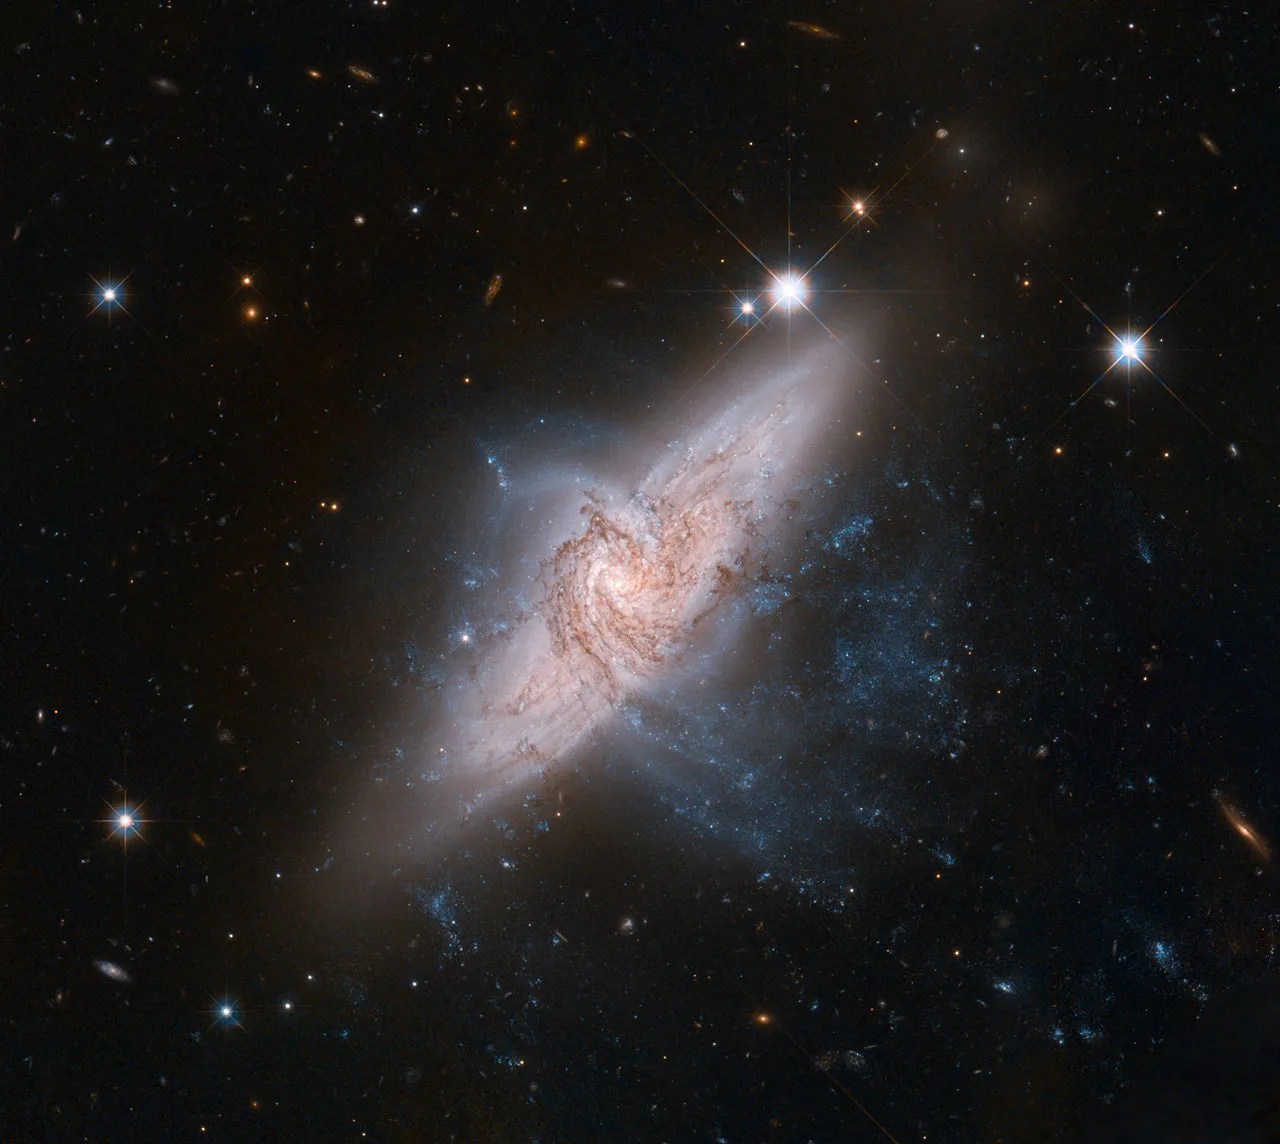 Two edge-on, spiral galaxies appear to be at right angles to each other. One extending from the lower left to the upper right. The other has distinct spiral arms and dust lanes and extends from just left of center to the lower right. Black background dotted with stars.